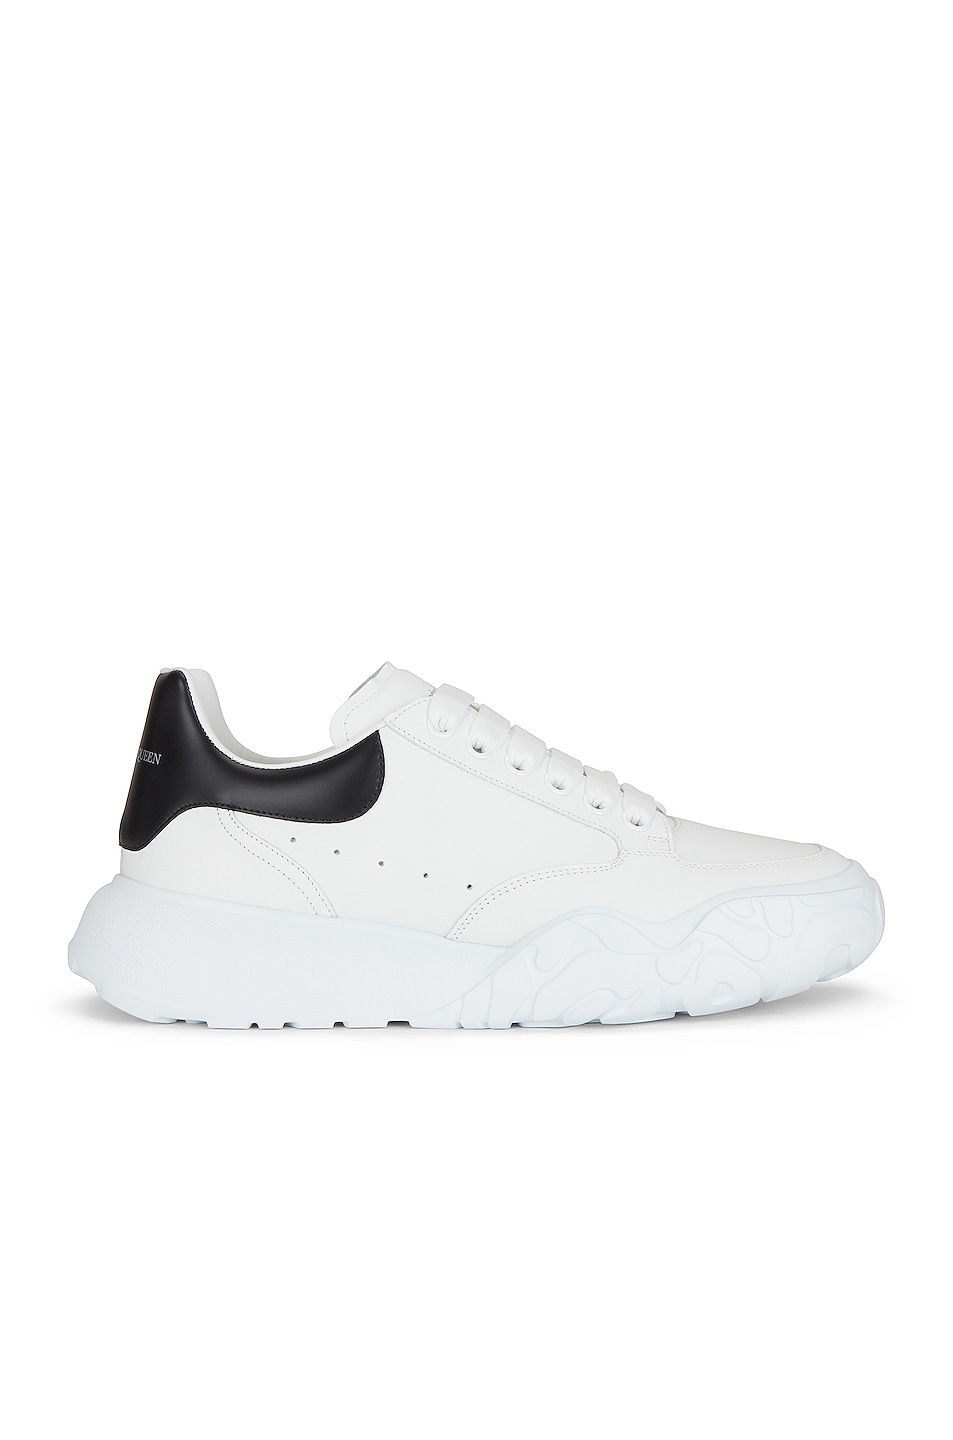 Image 1 of Alexander McQueen Leather Sneaker in White & Black